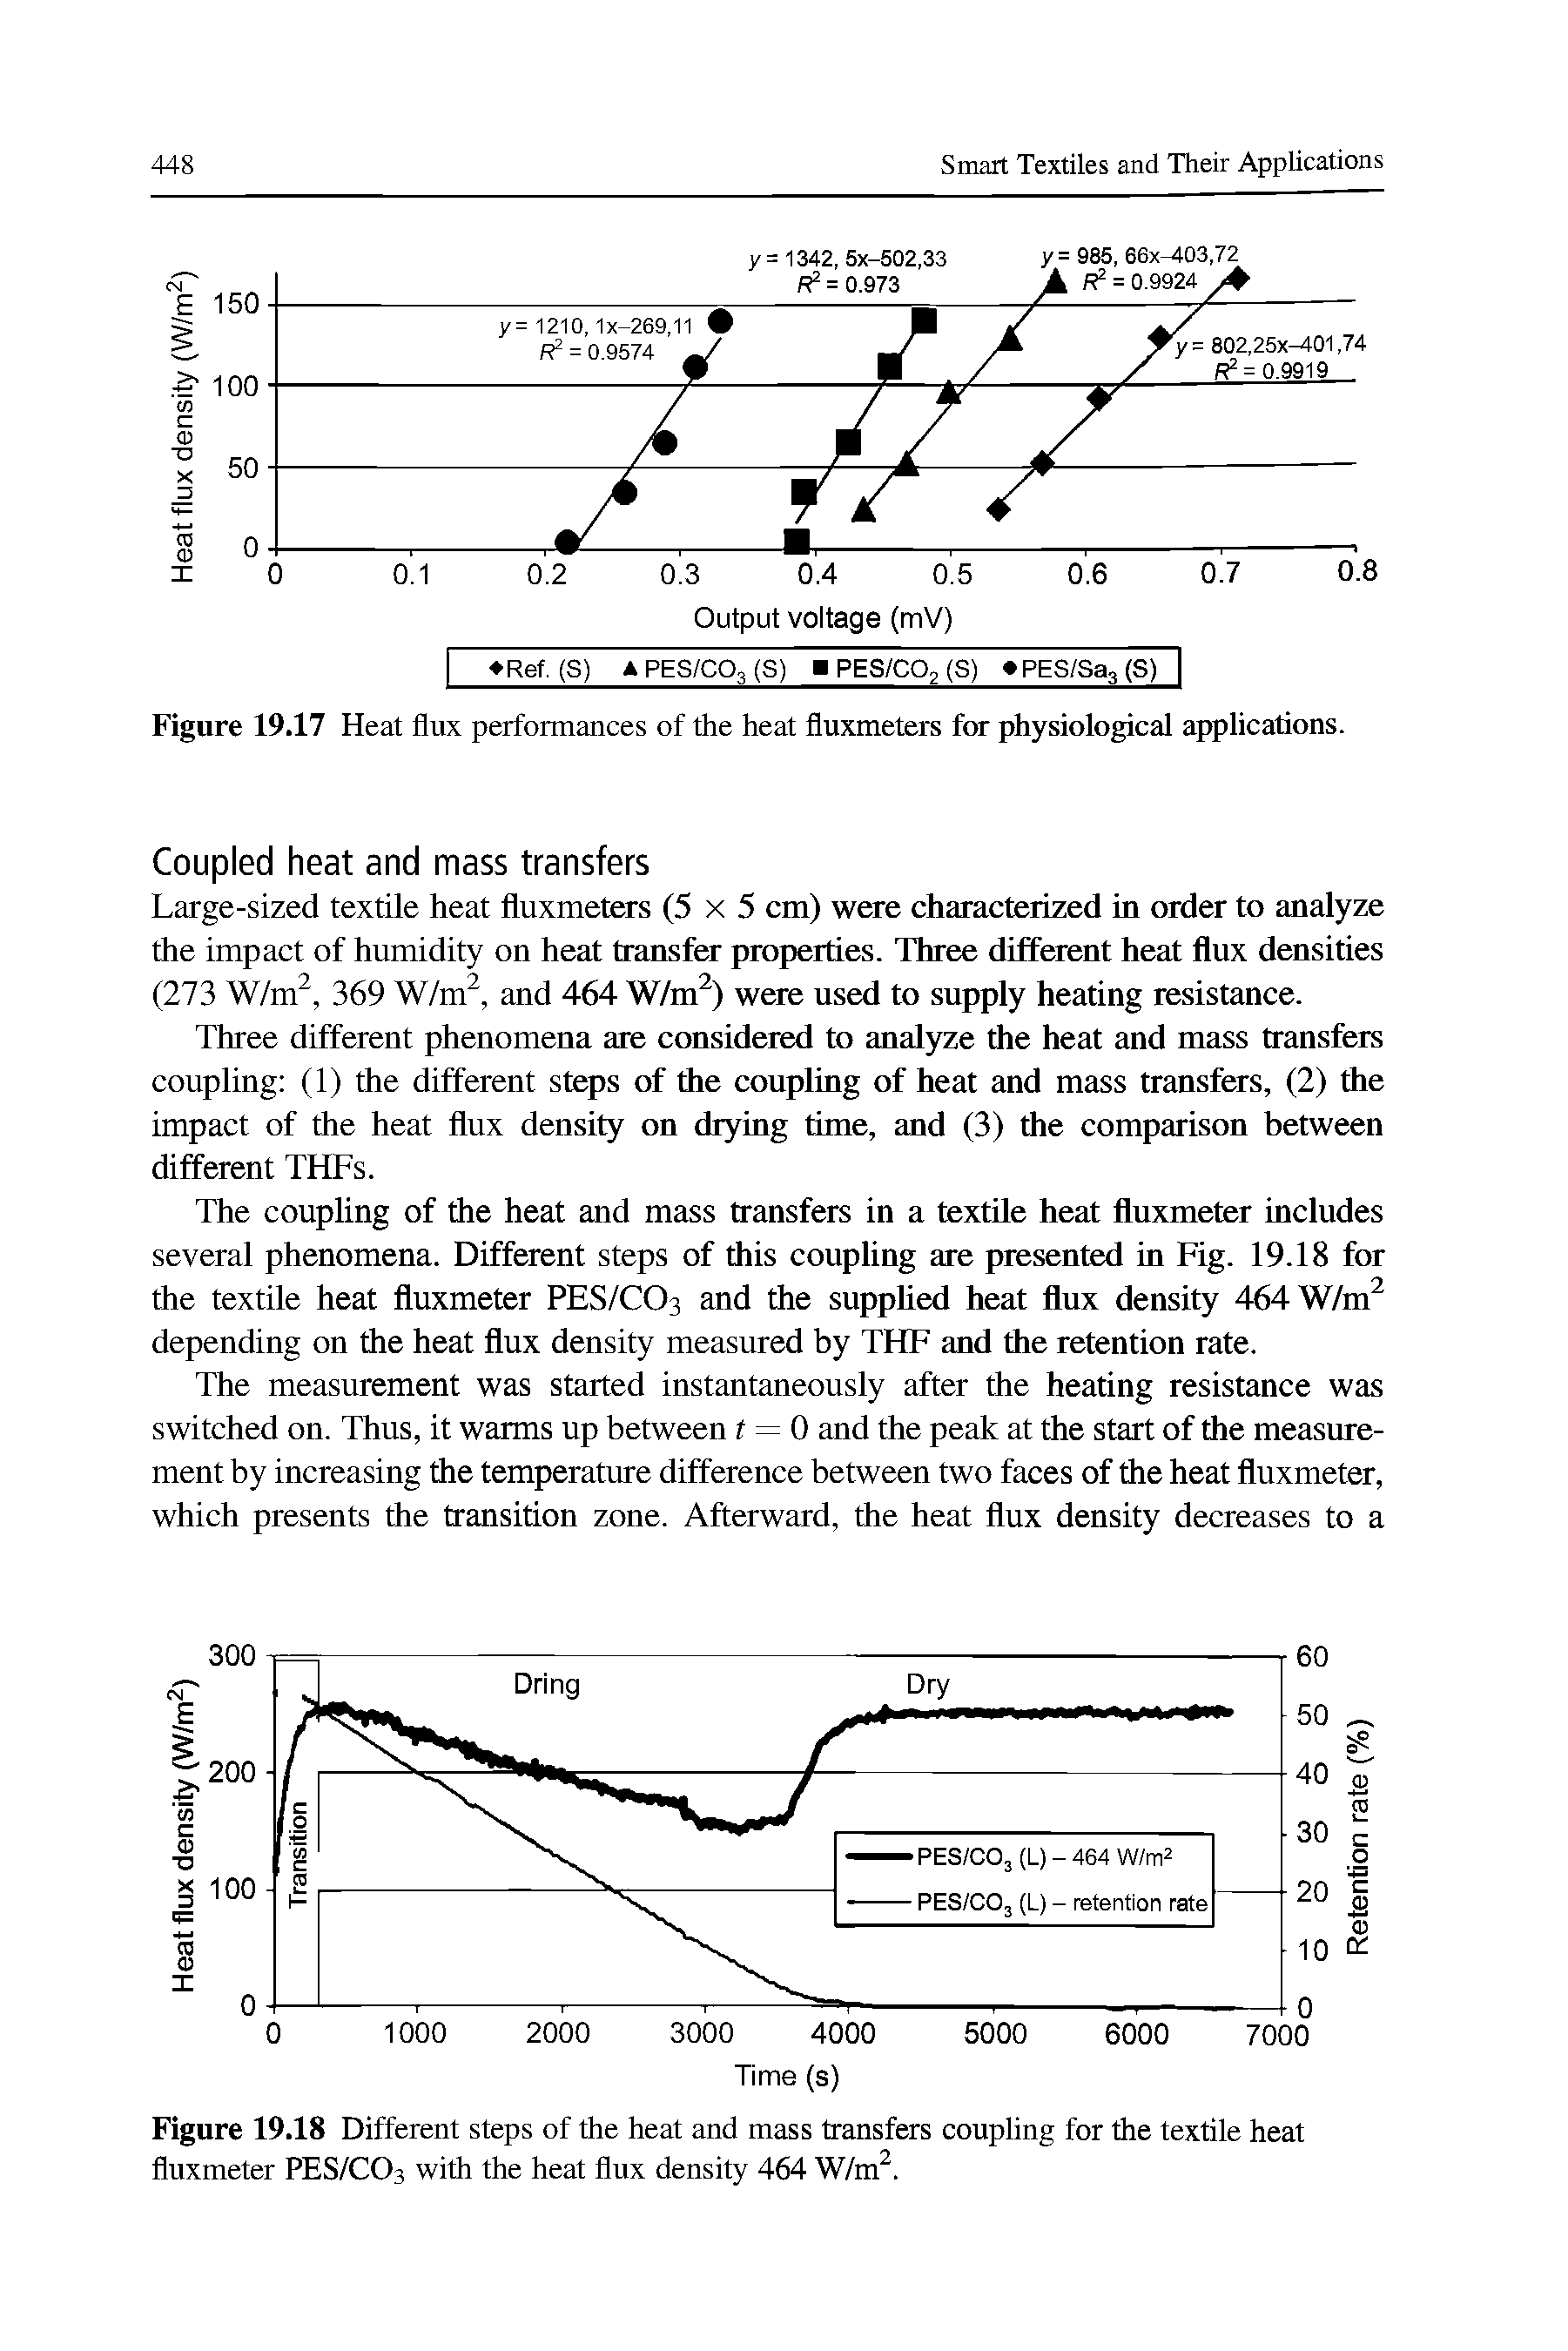 Figure 19.17 Heat flux performances of the heat fluxmeters for physiological applications.